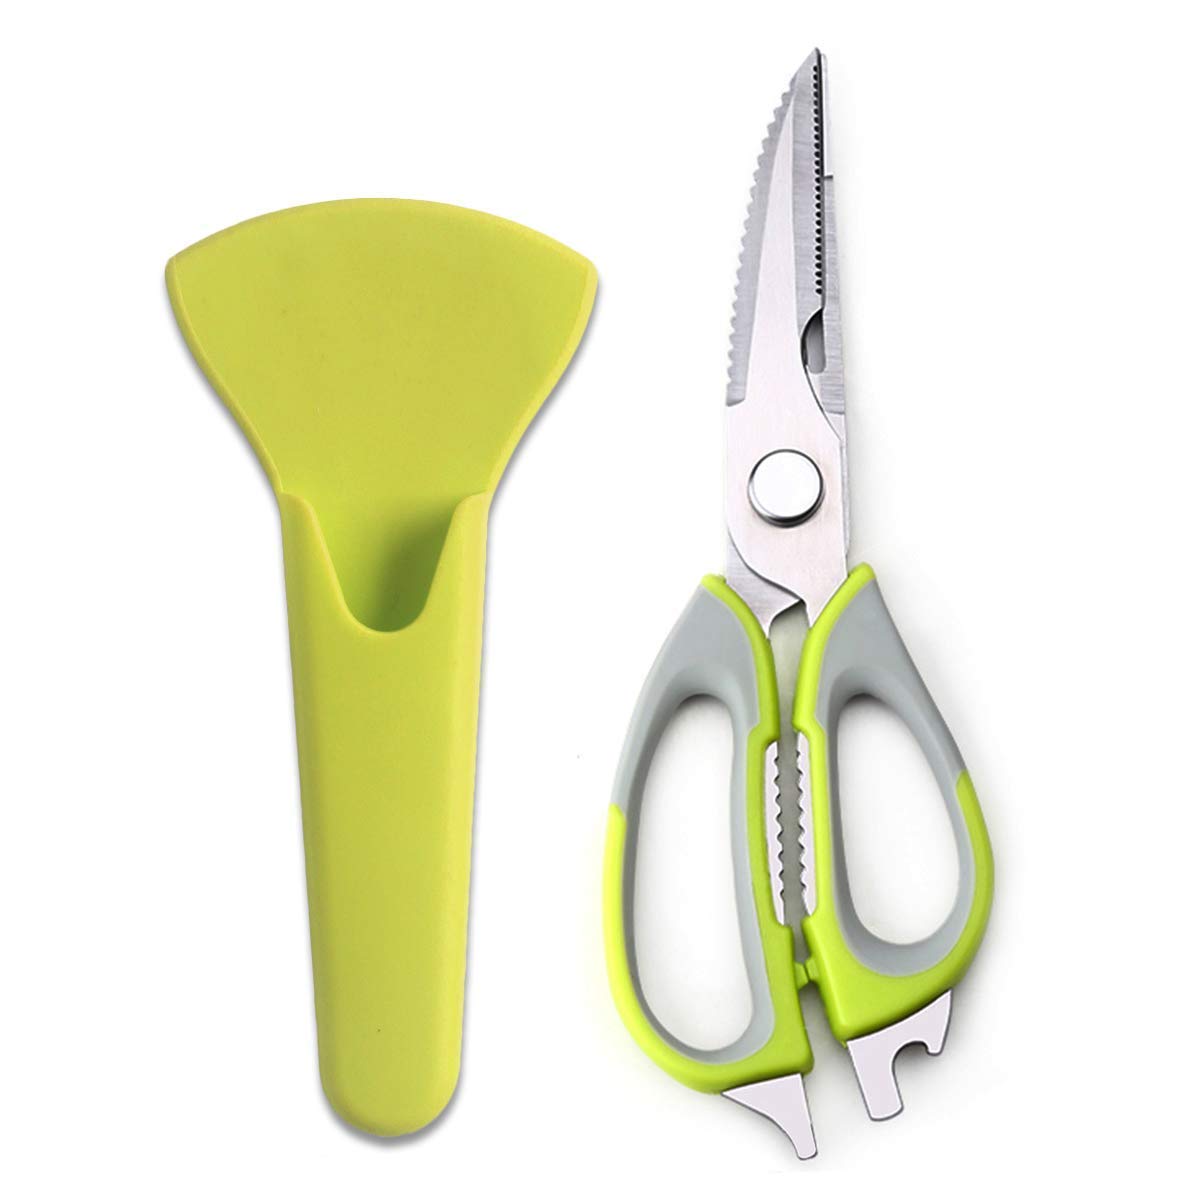 8 in 1 Stainless Steel Scissor With Plastic Handle And Cover